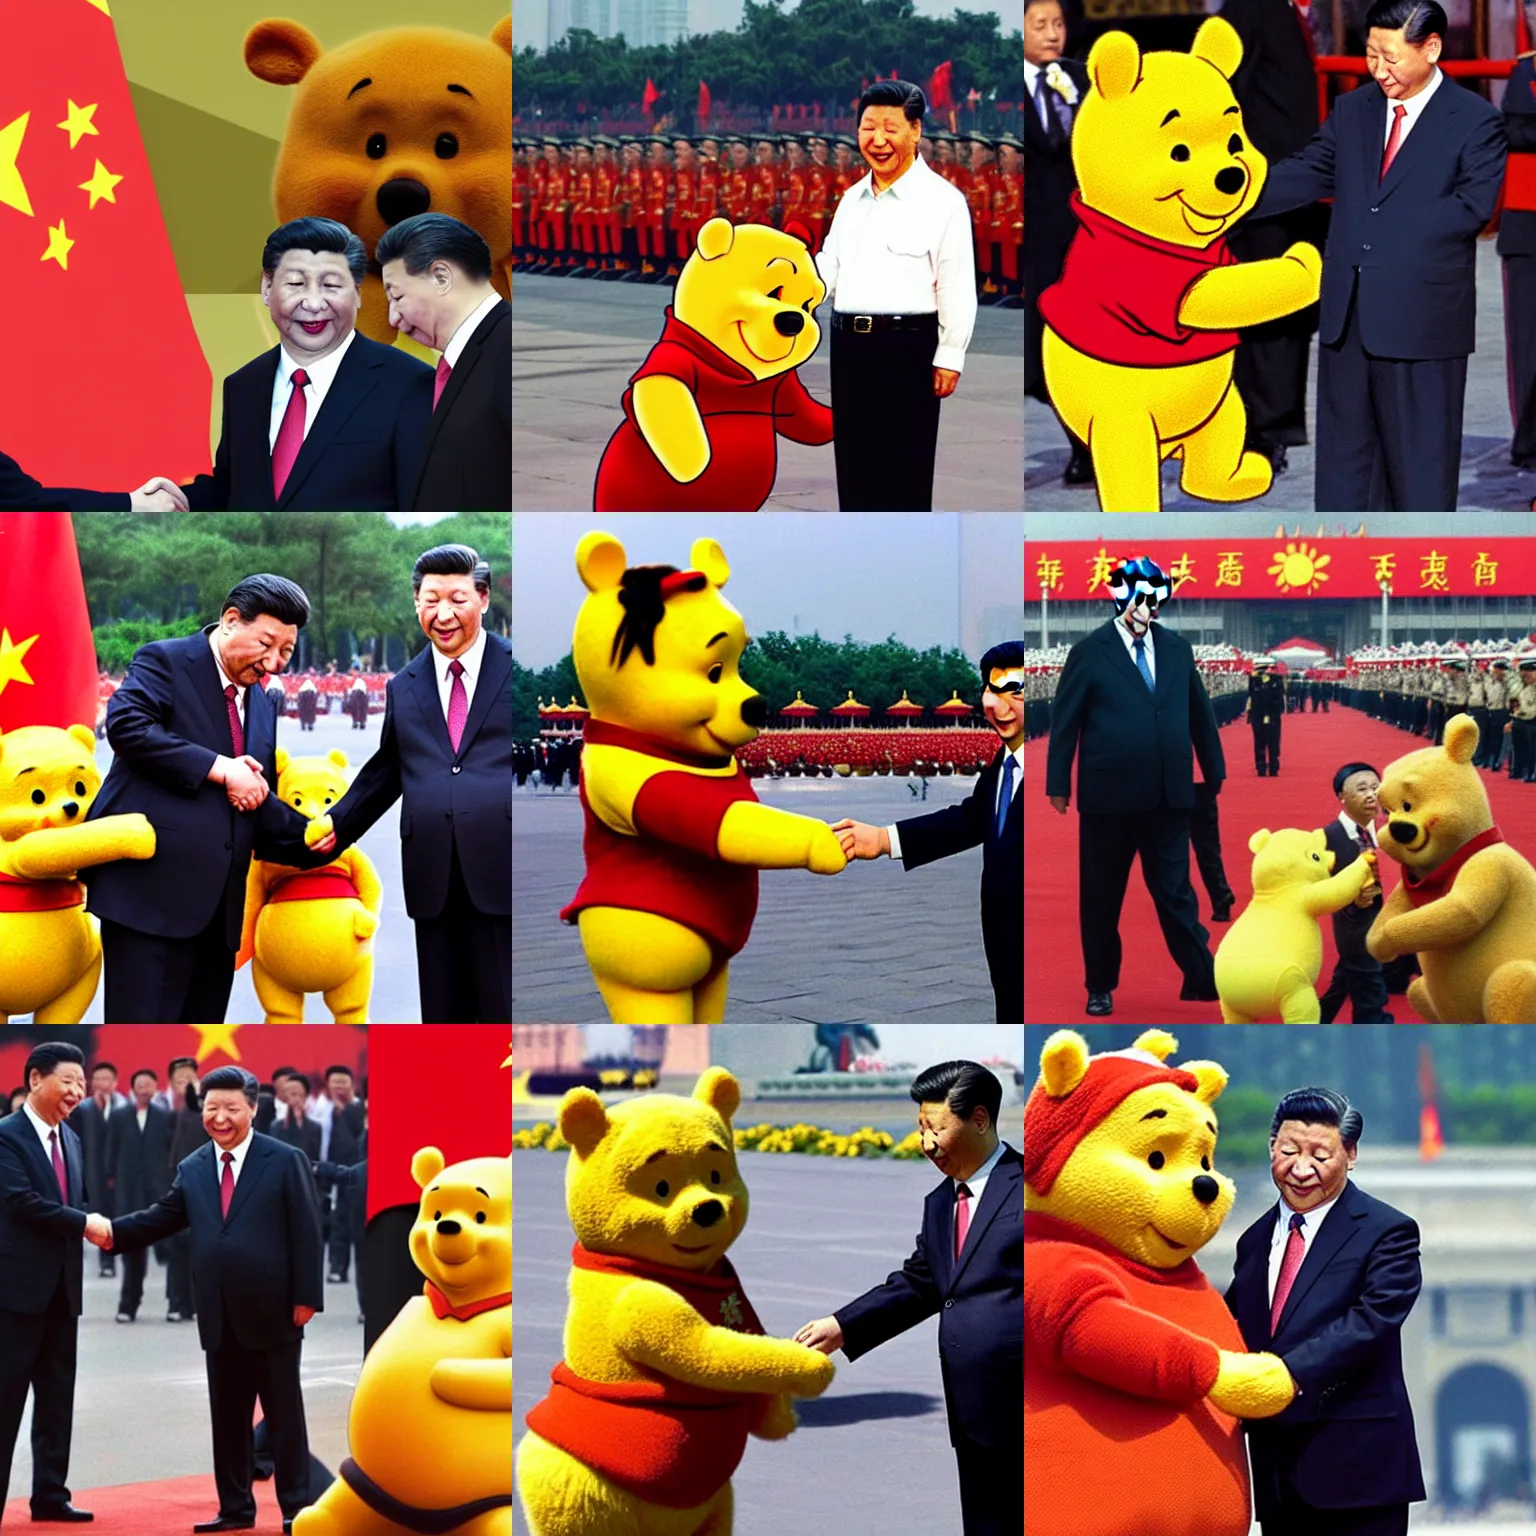 Prompt: Xi Jinping! shaking hands with Winnie the Pooh! on Tiananmen Square!